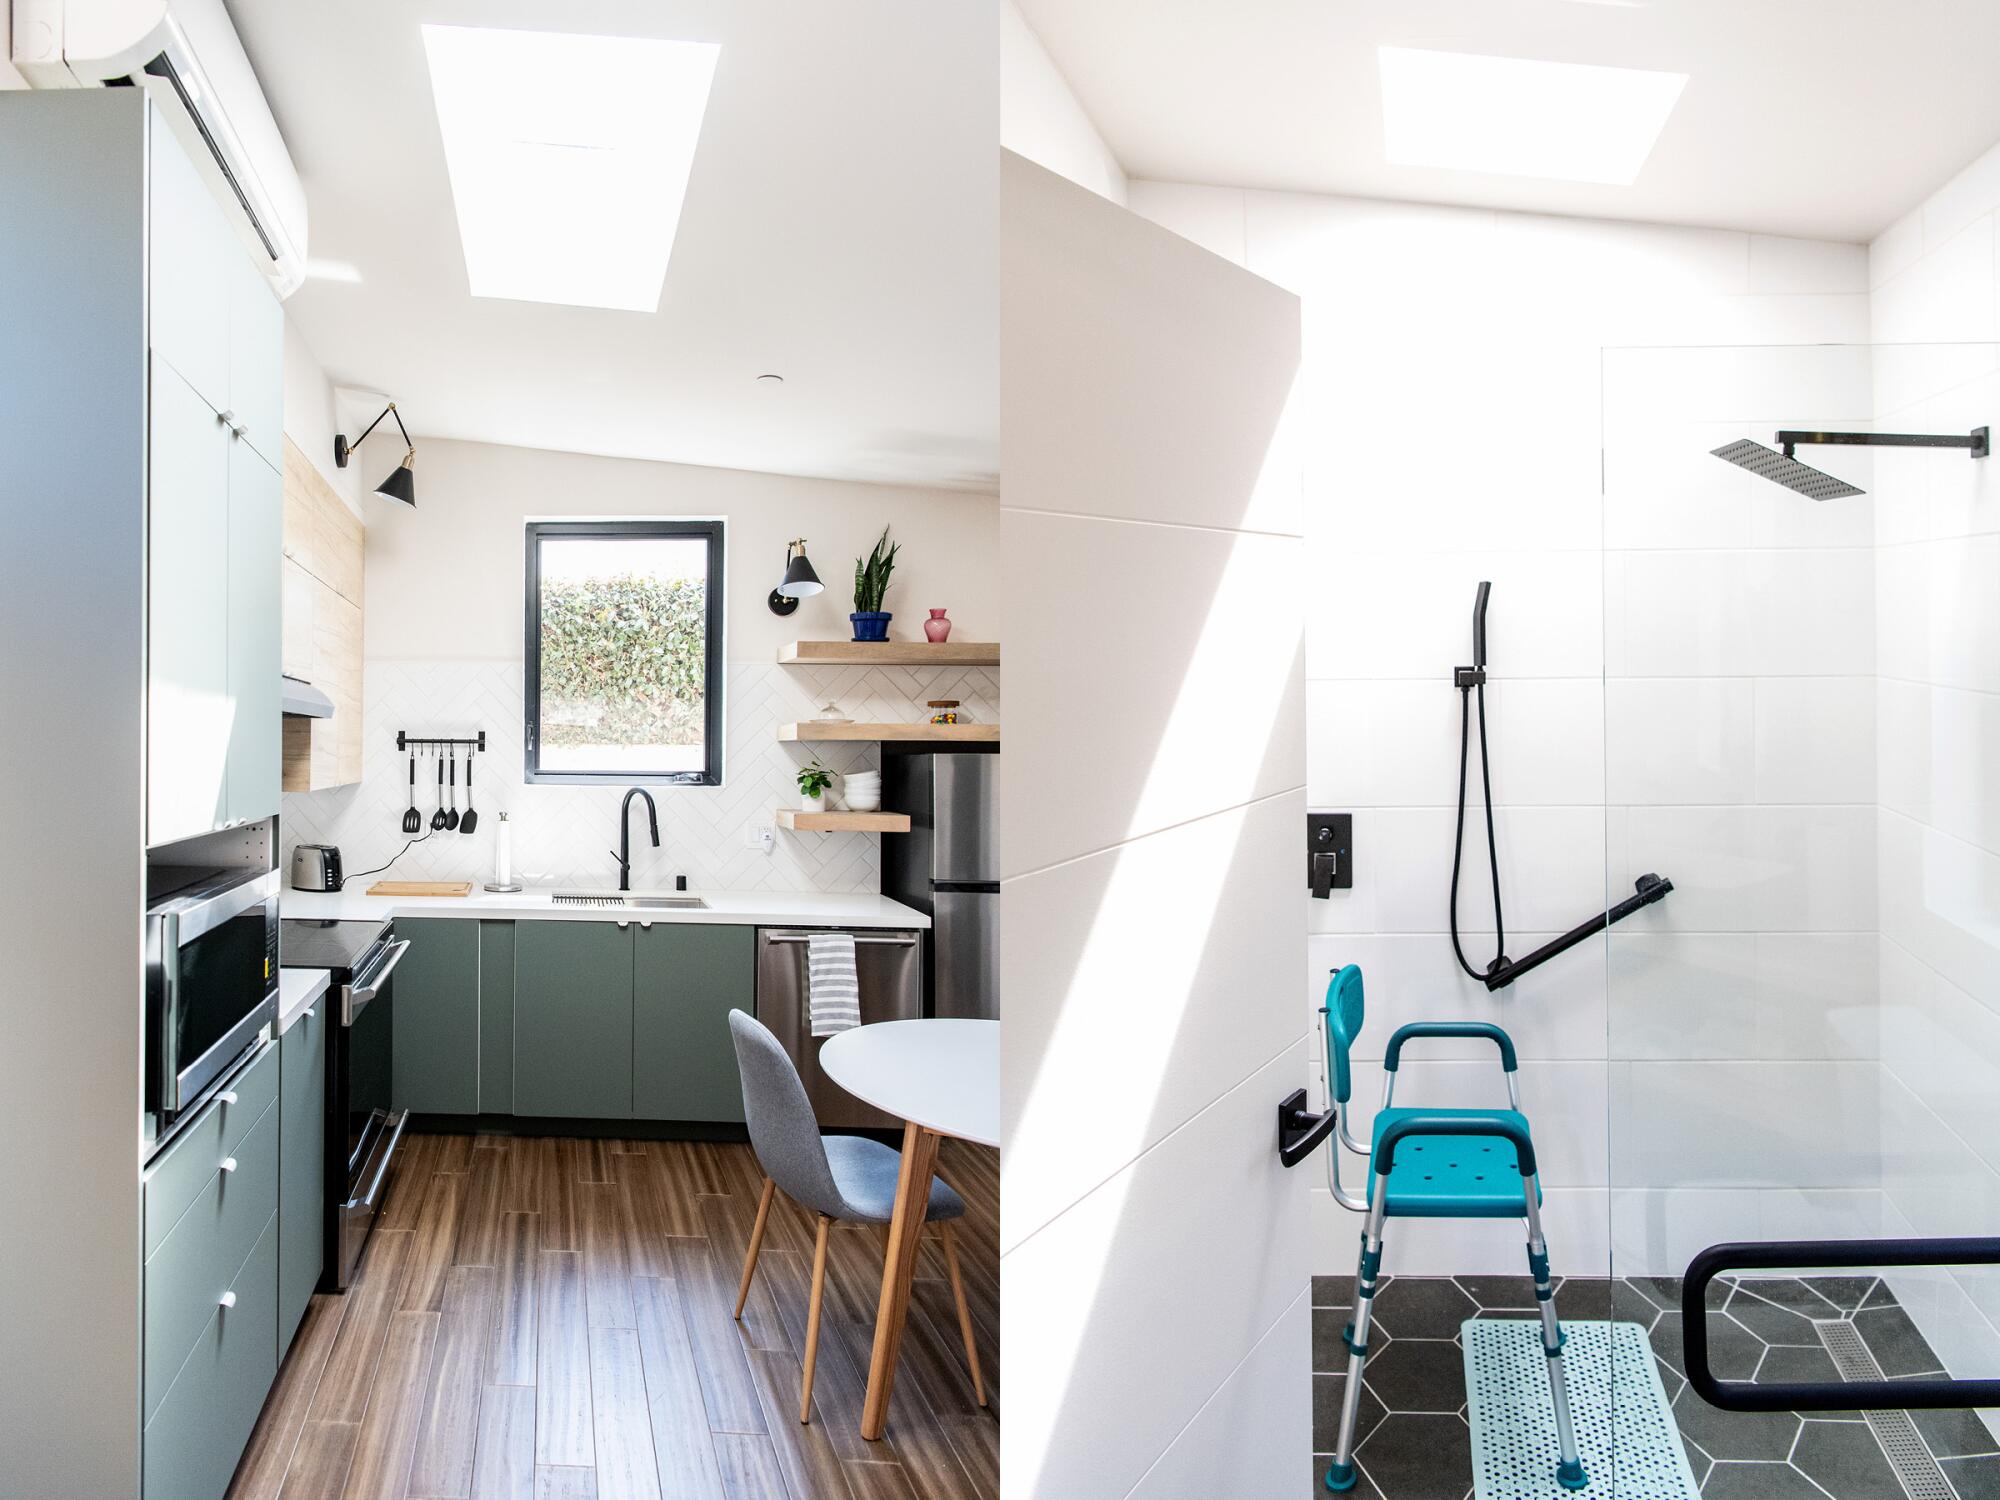 Two images side by side of a kitchen and a shower